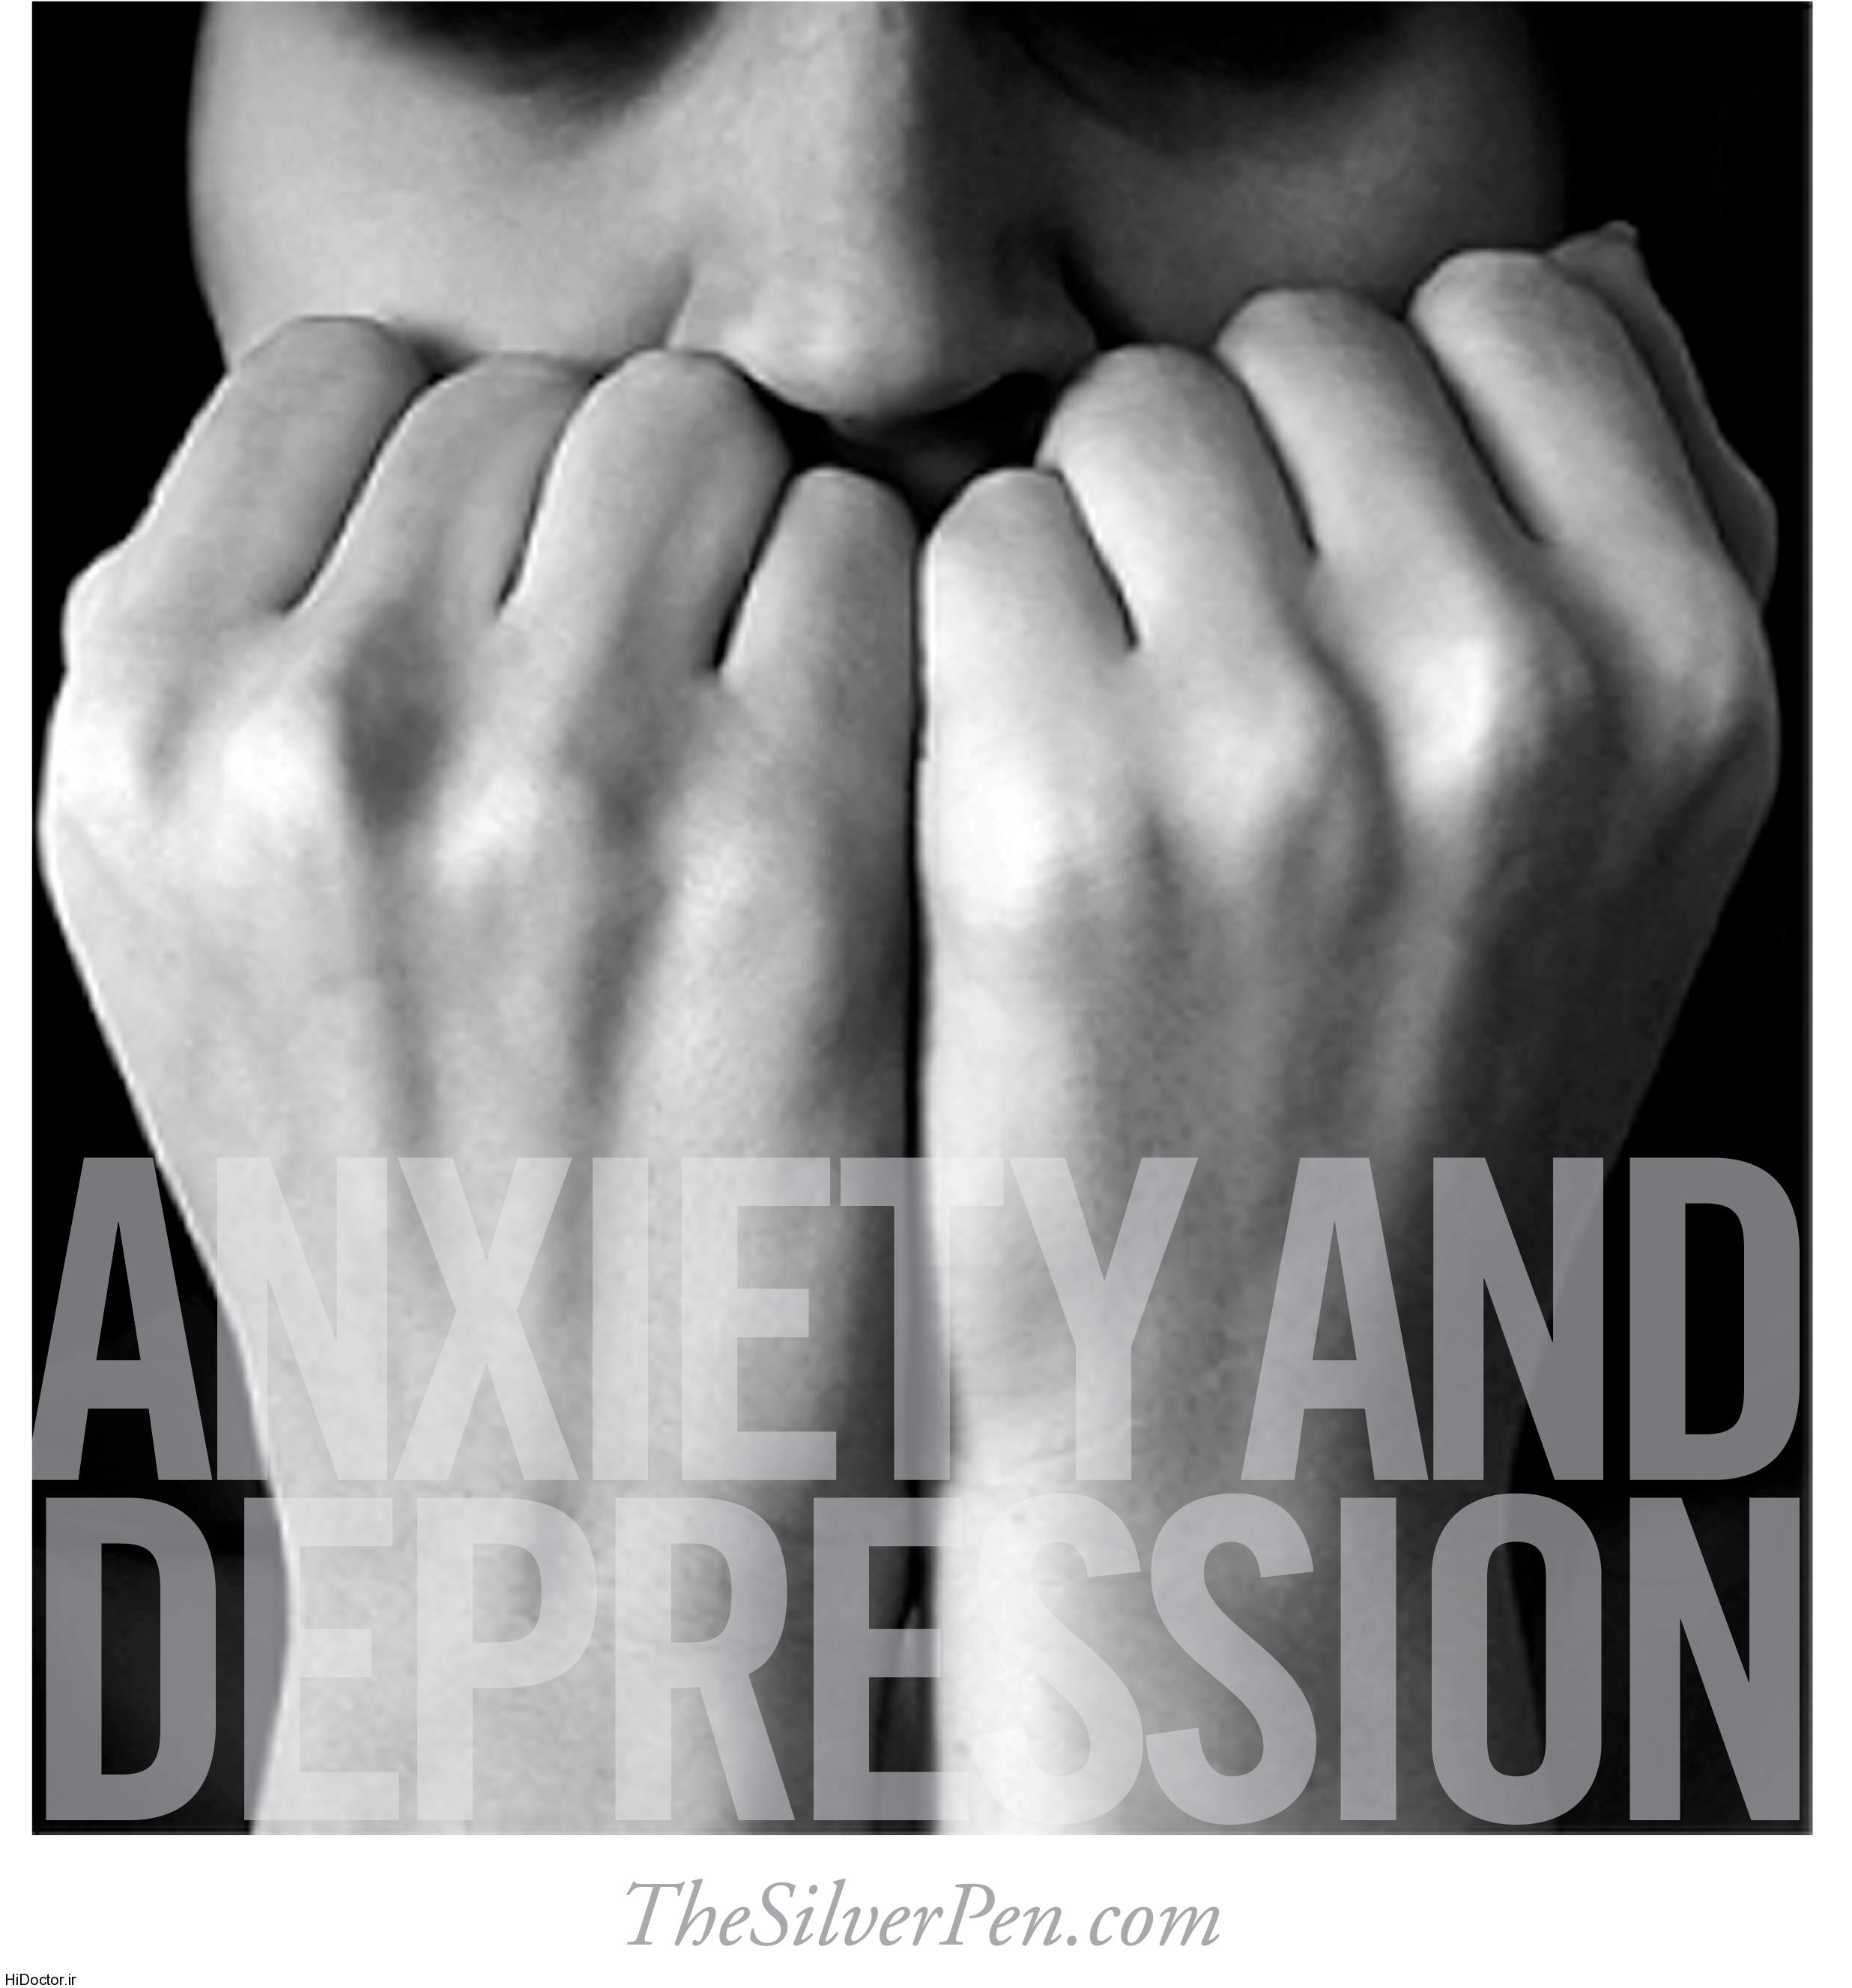 anxiety-and-depression1